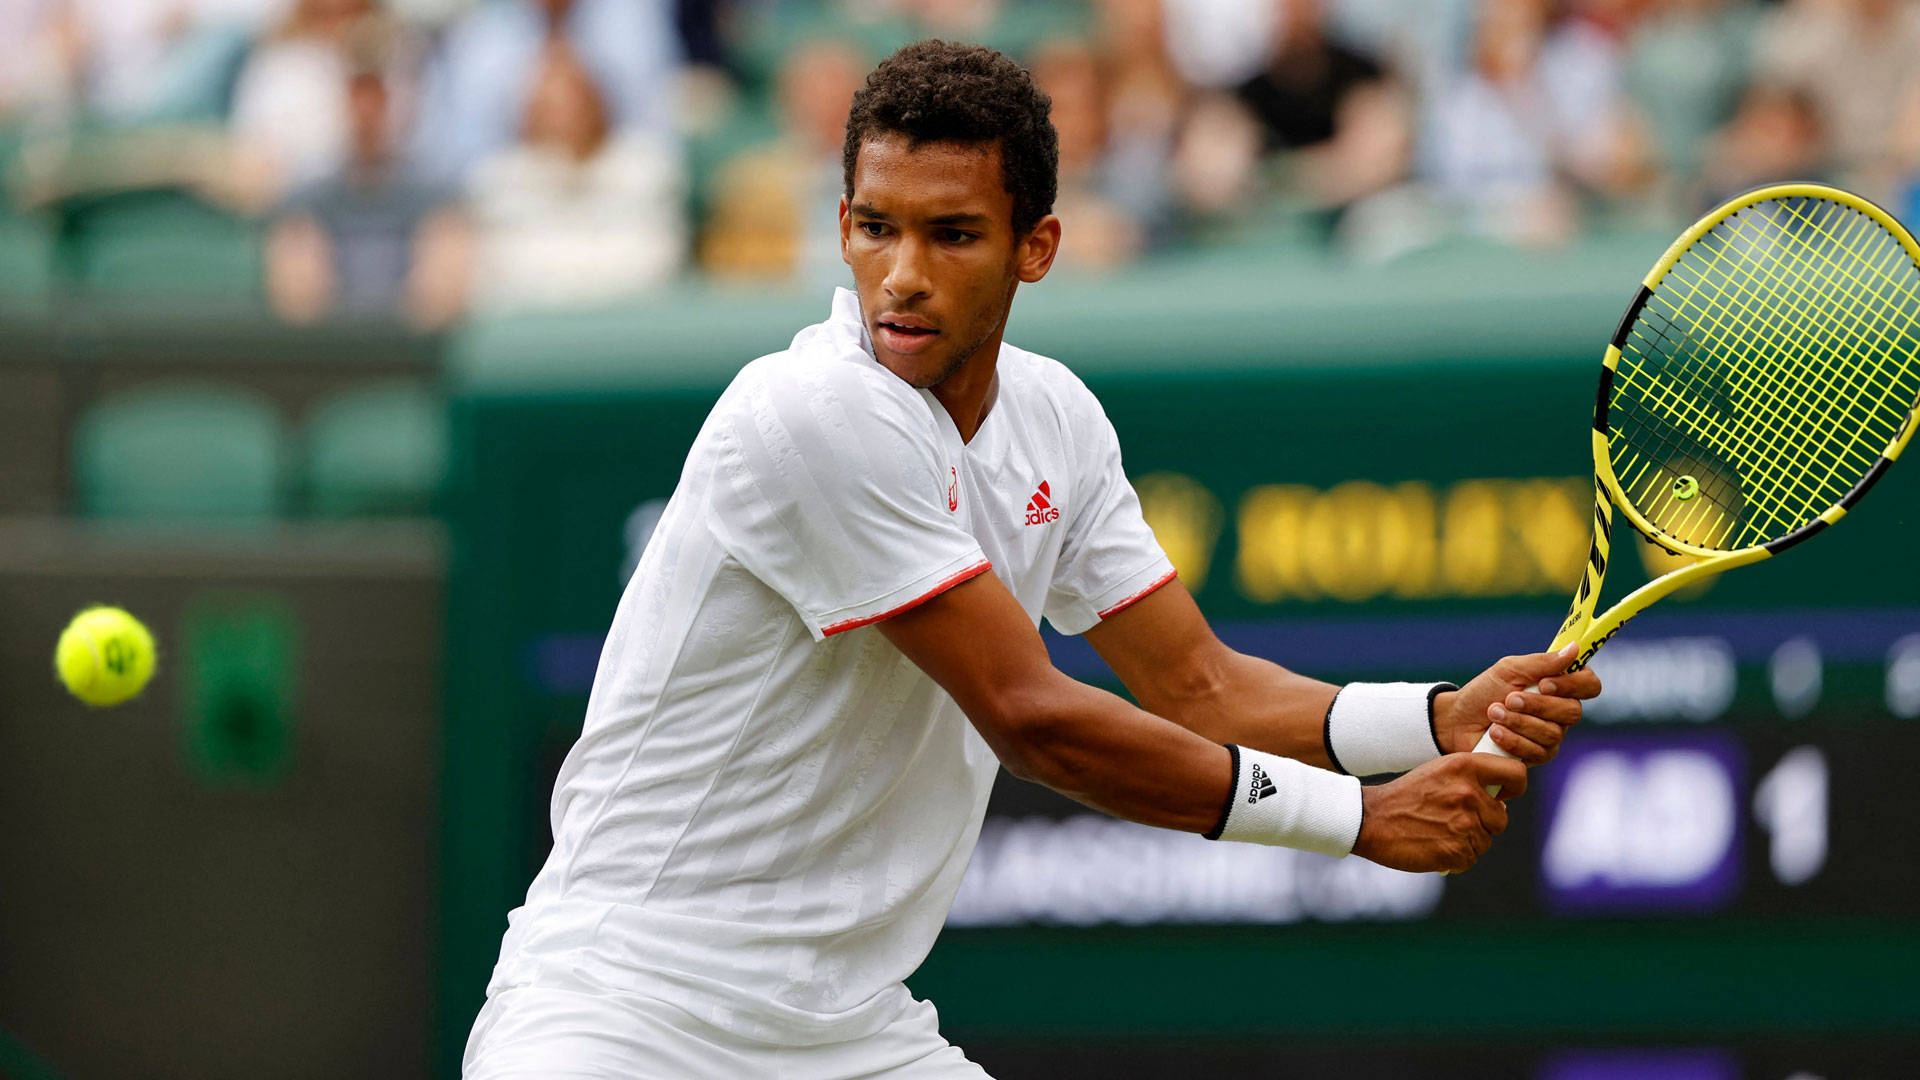 Felix Auger-Aliassime in action with his tennis racket Wallpaper